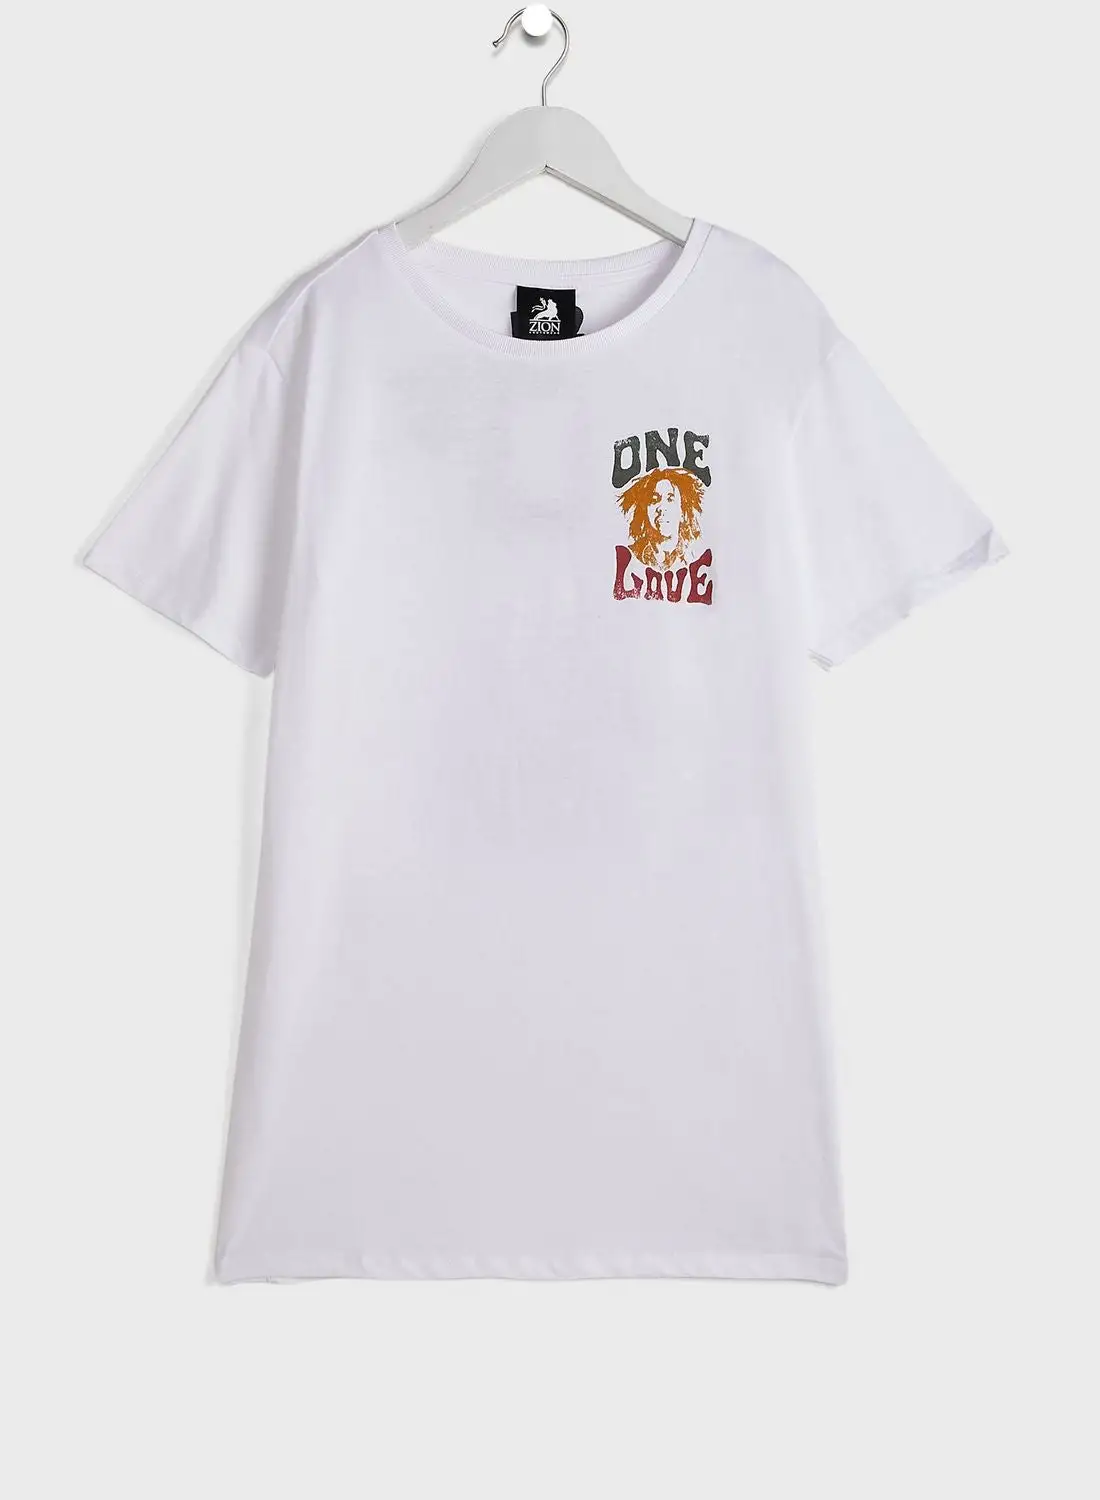 Cotton On Kids Character T-Shirt